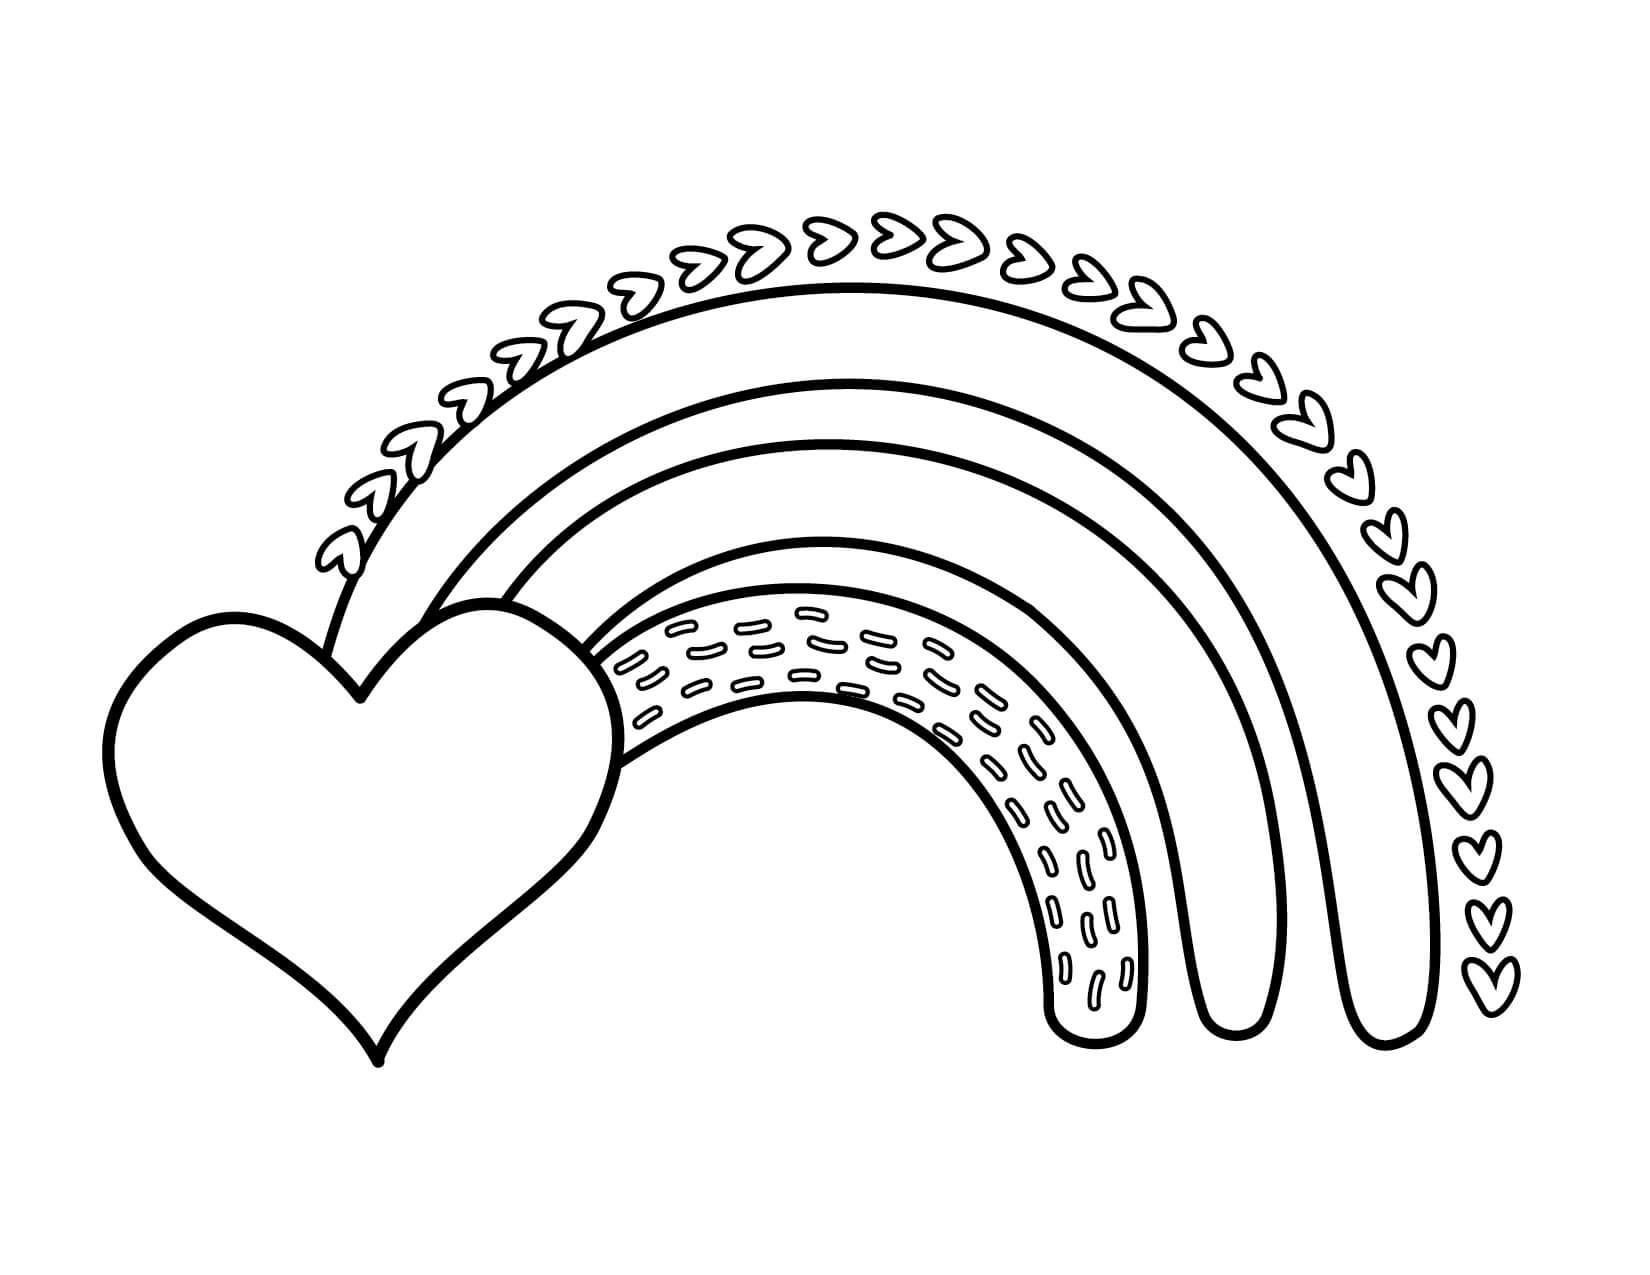 Rainbow with a heart coloring page